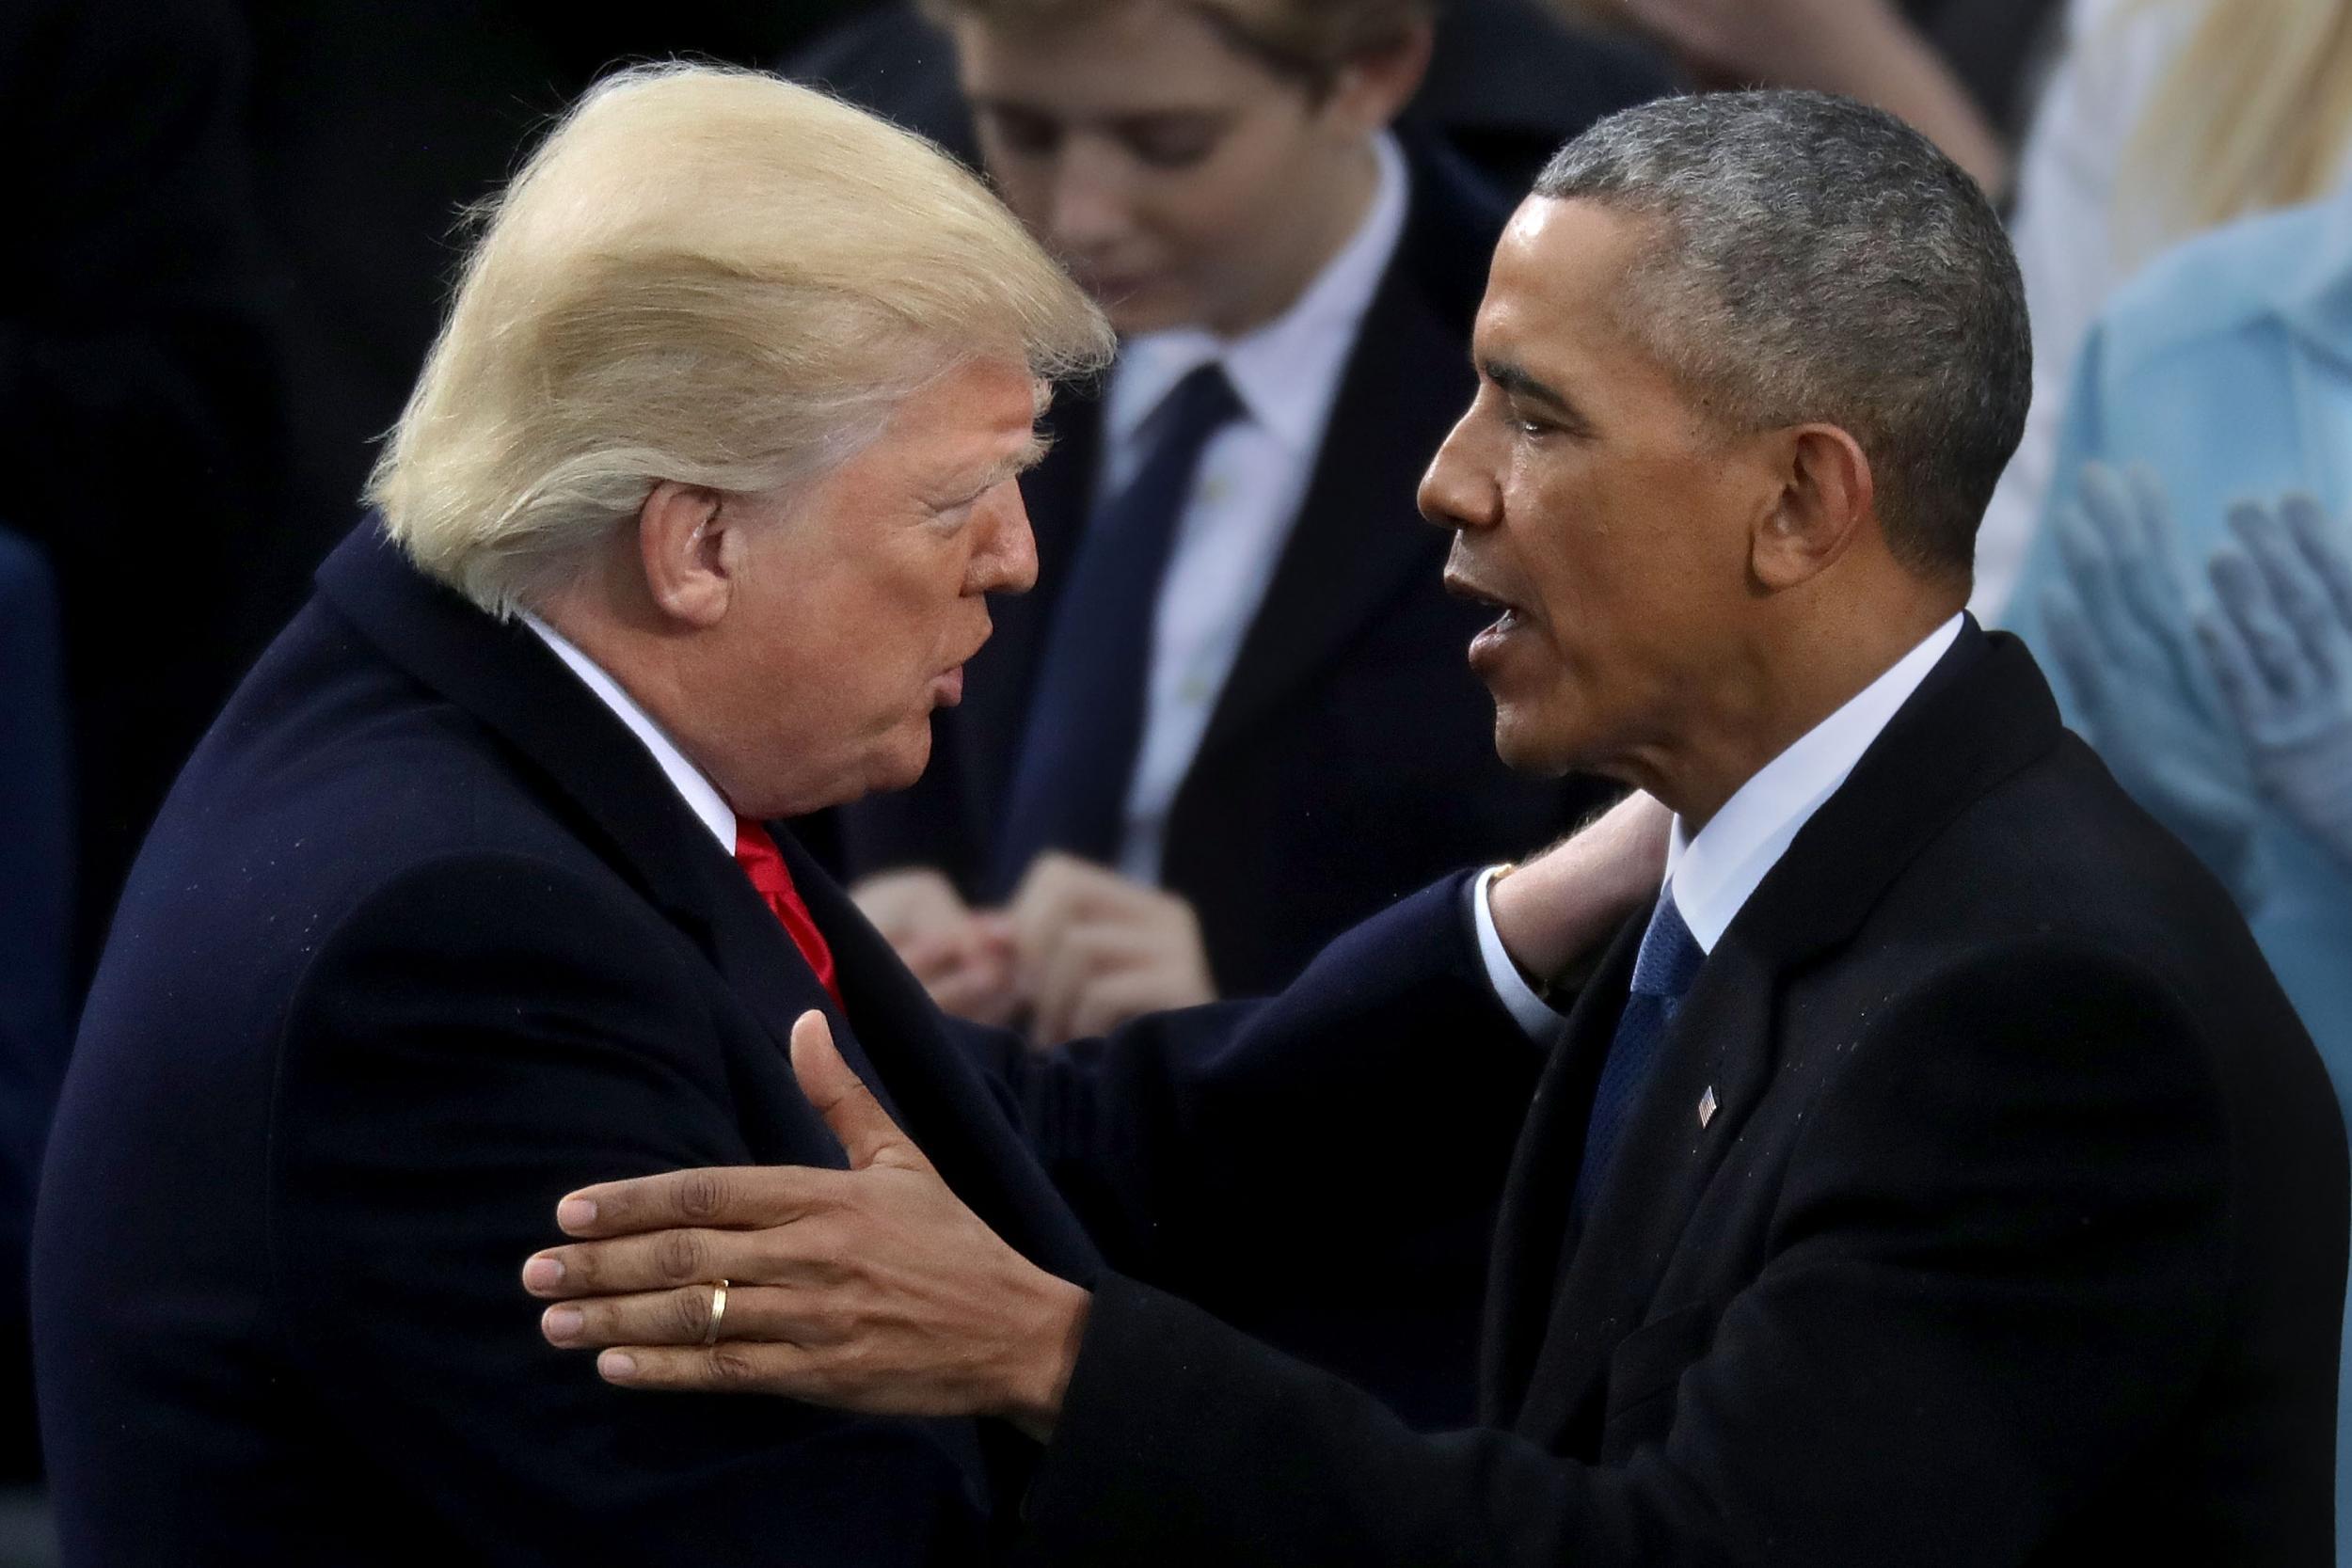 Trump says Obama isn't a great president because 'much of what he's done we've undone'